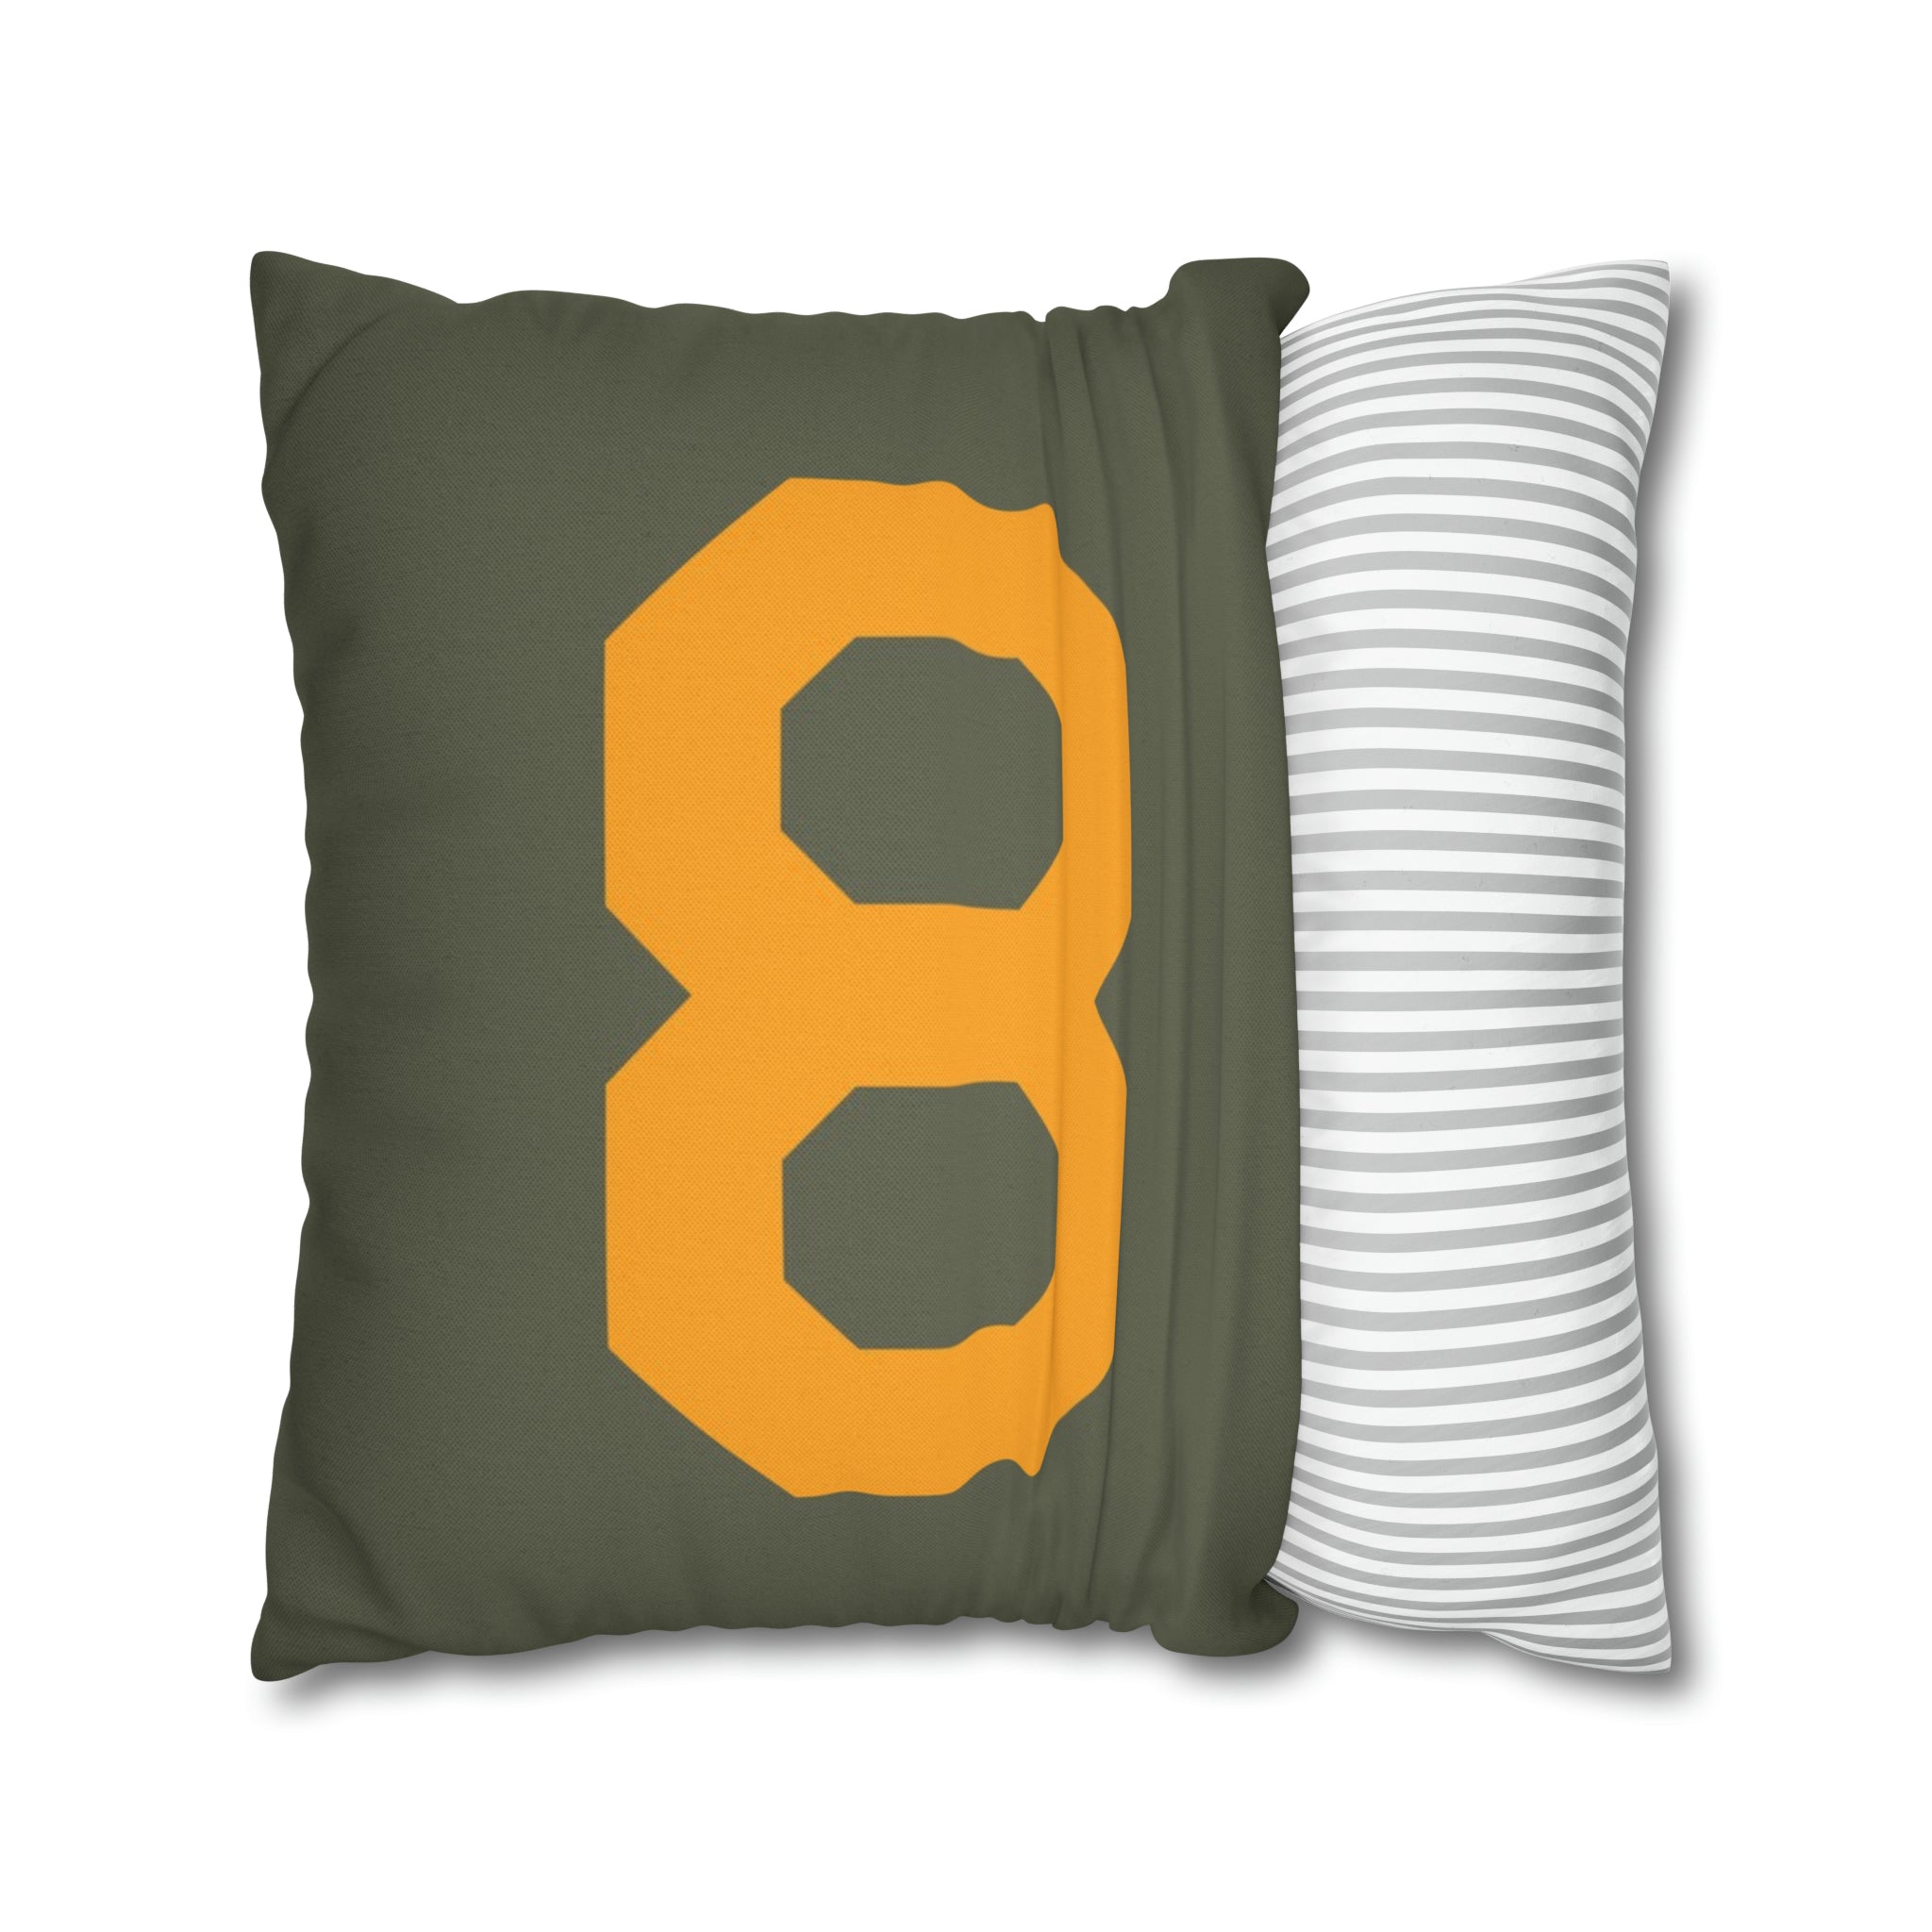 WWII USAAF Number "8" Square Pillowcase - I Love a Hangar